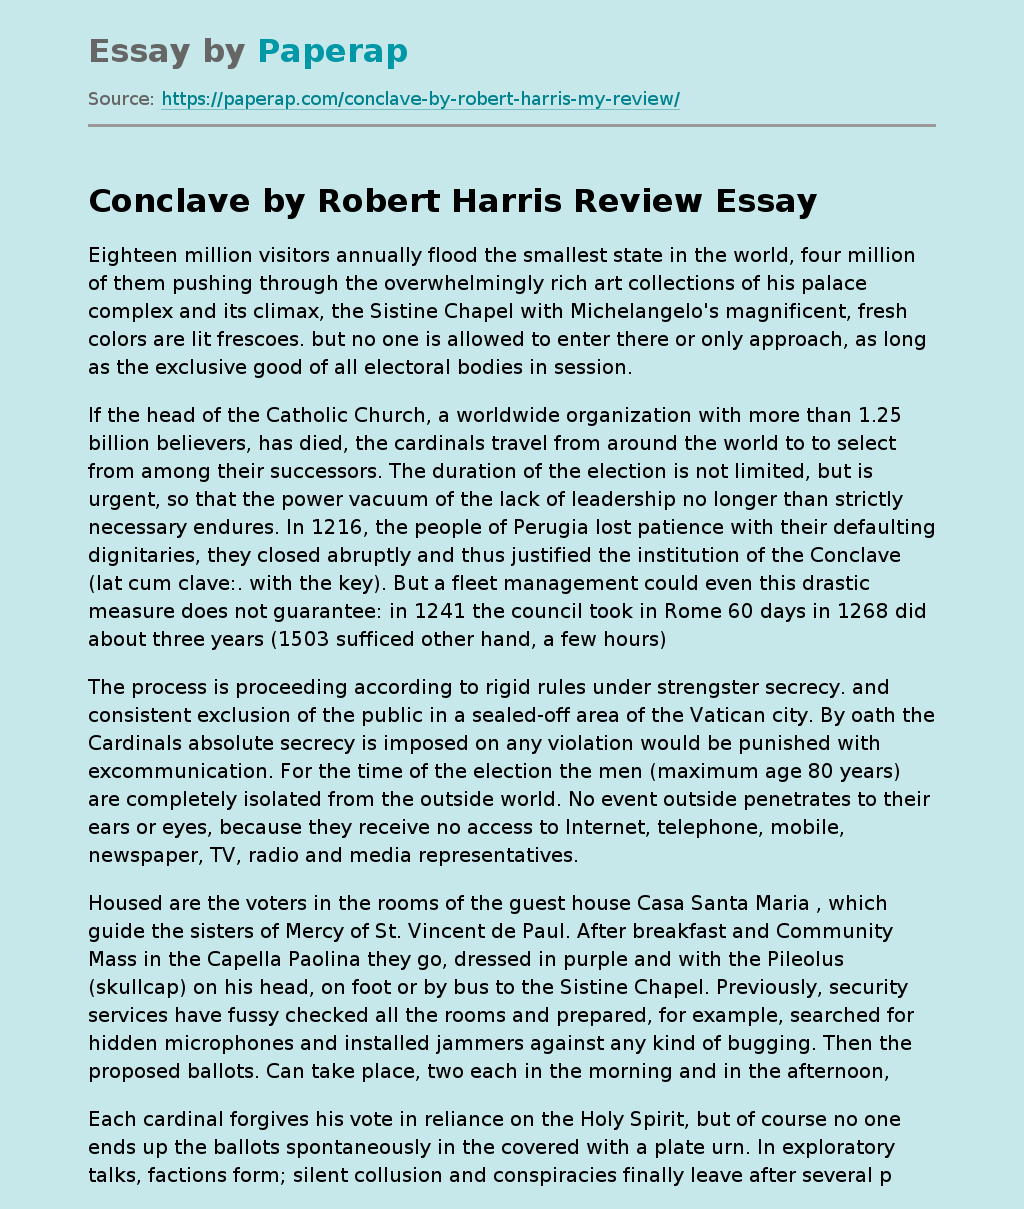 Conclave by Robert Harris Review